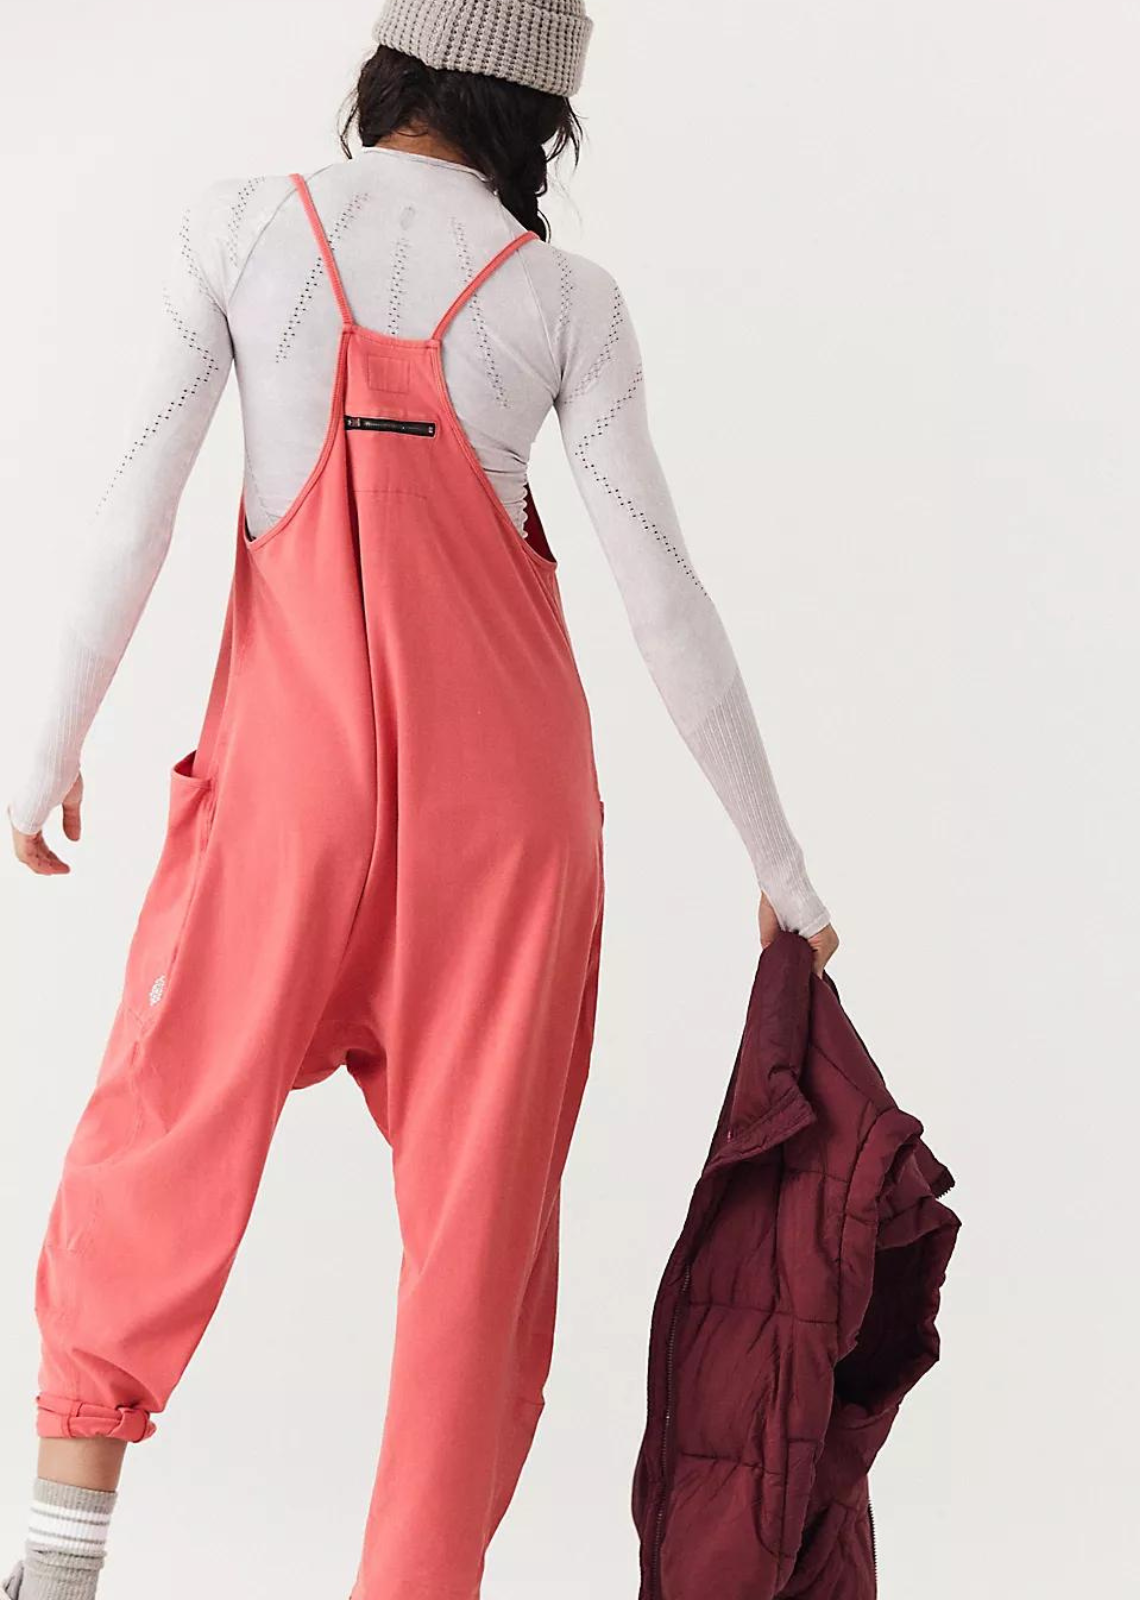 This soft and comfy onesie features a slouchy, relaxed-fitting design with a dropped crotch and convenient side pockets.